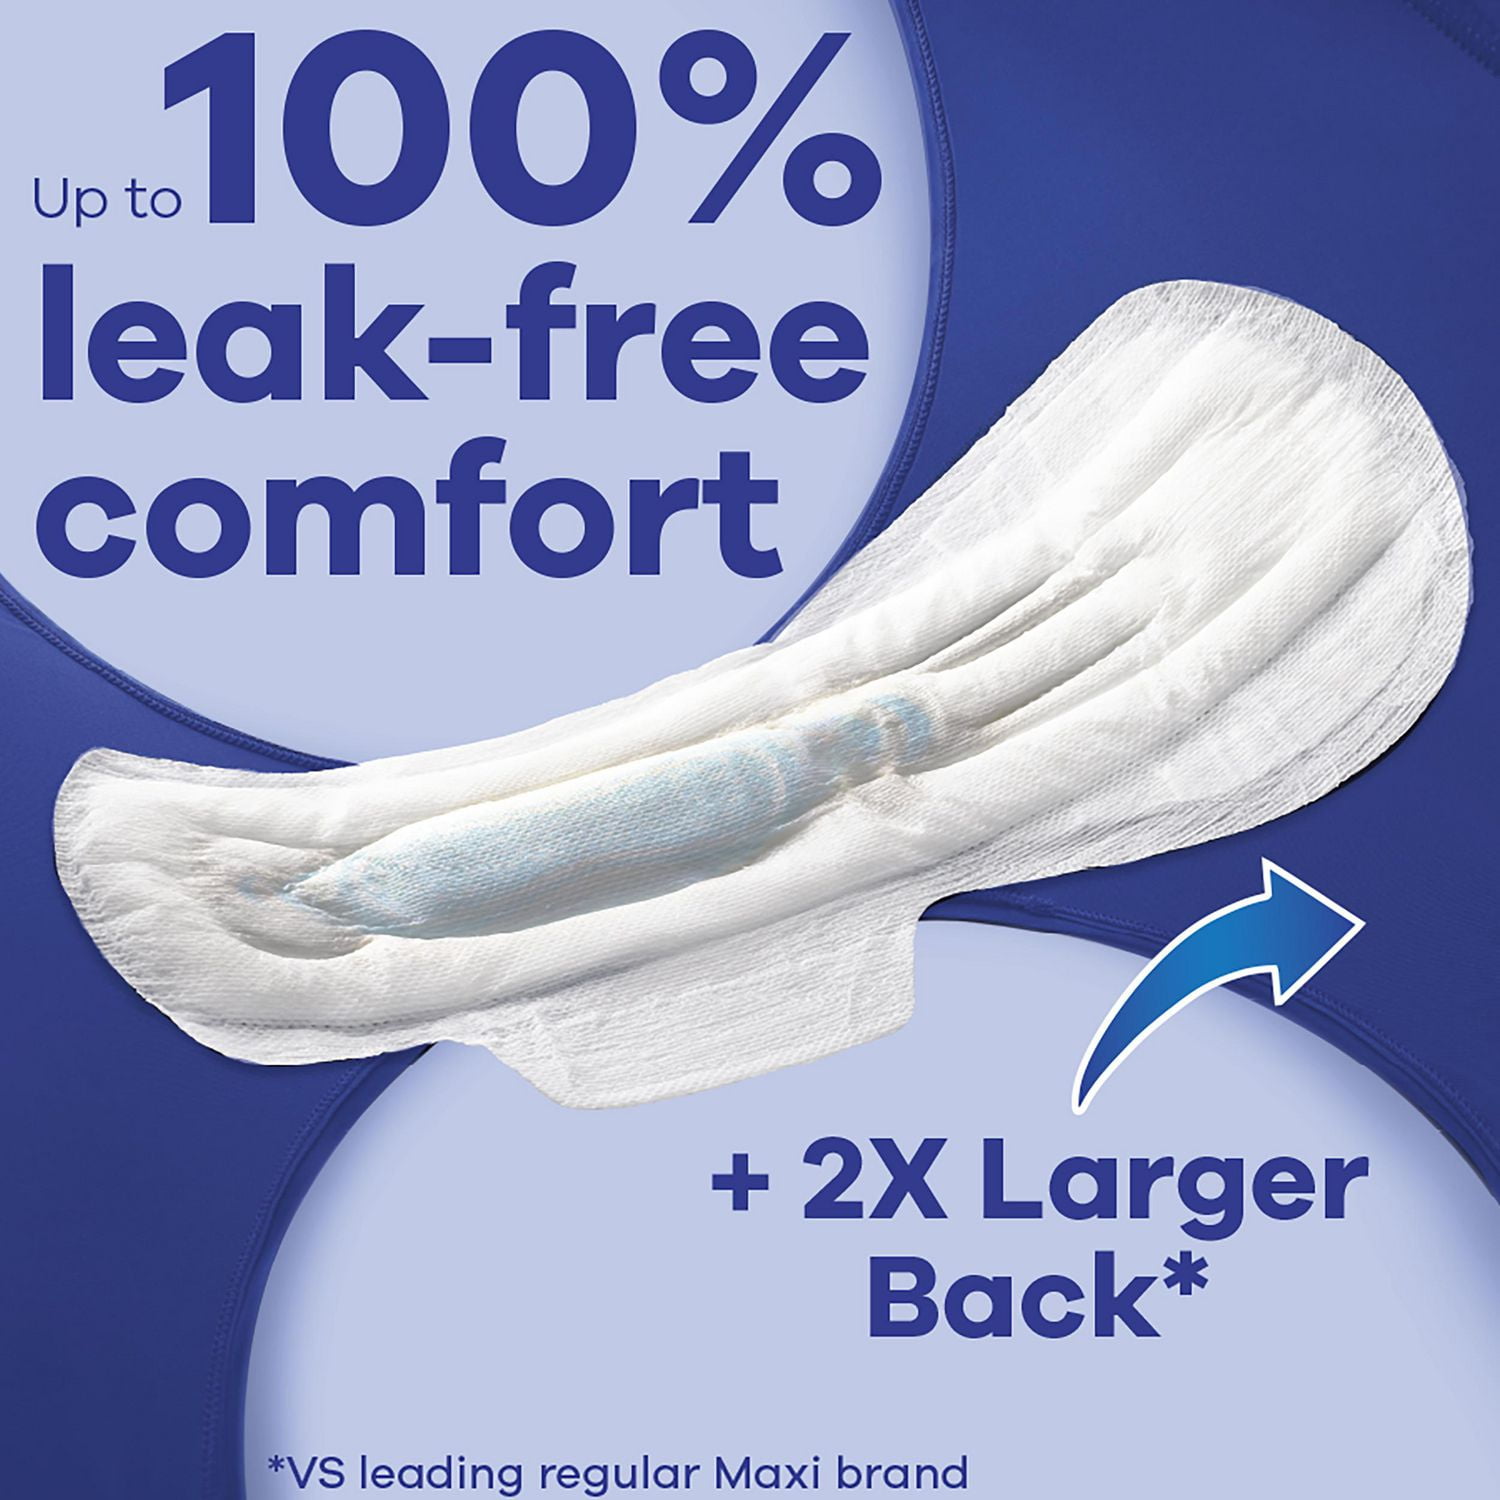 Always Maxi Pads Size 4 Overnight Absorbency Unscented with Wings